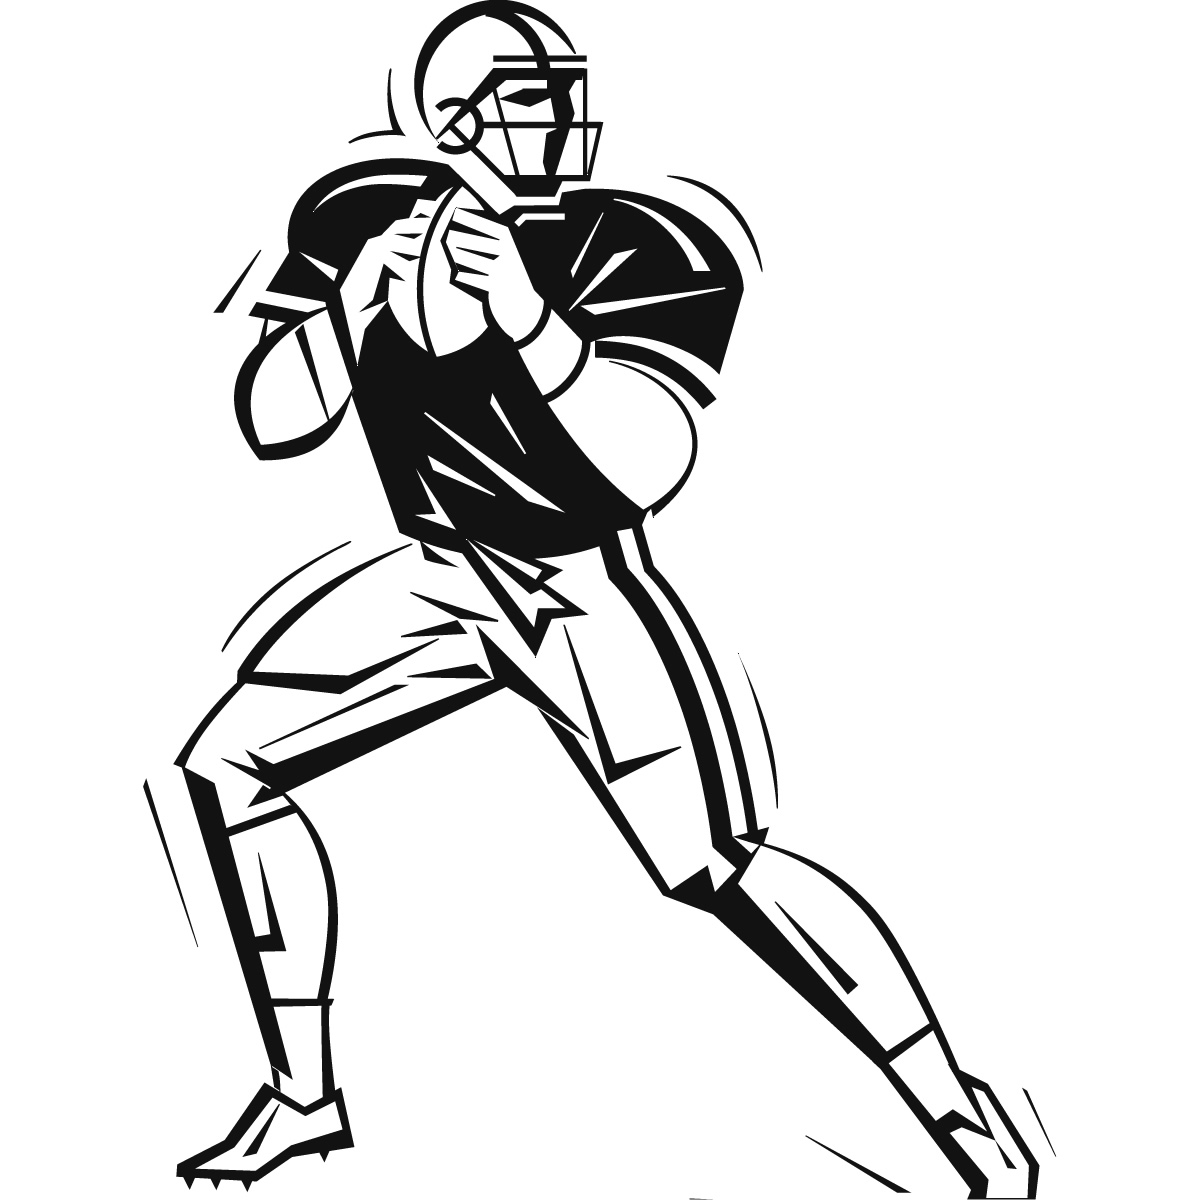 American Football Sport and Hobbies Wall Art Stickers Transfers